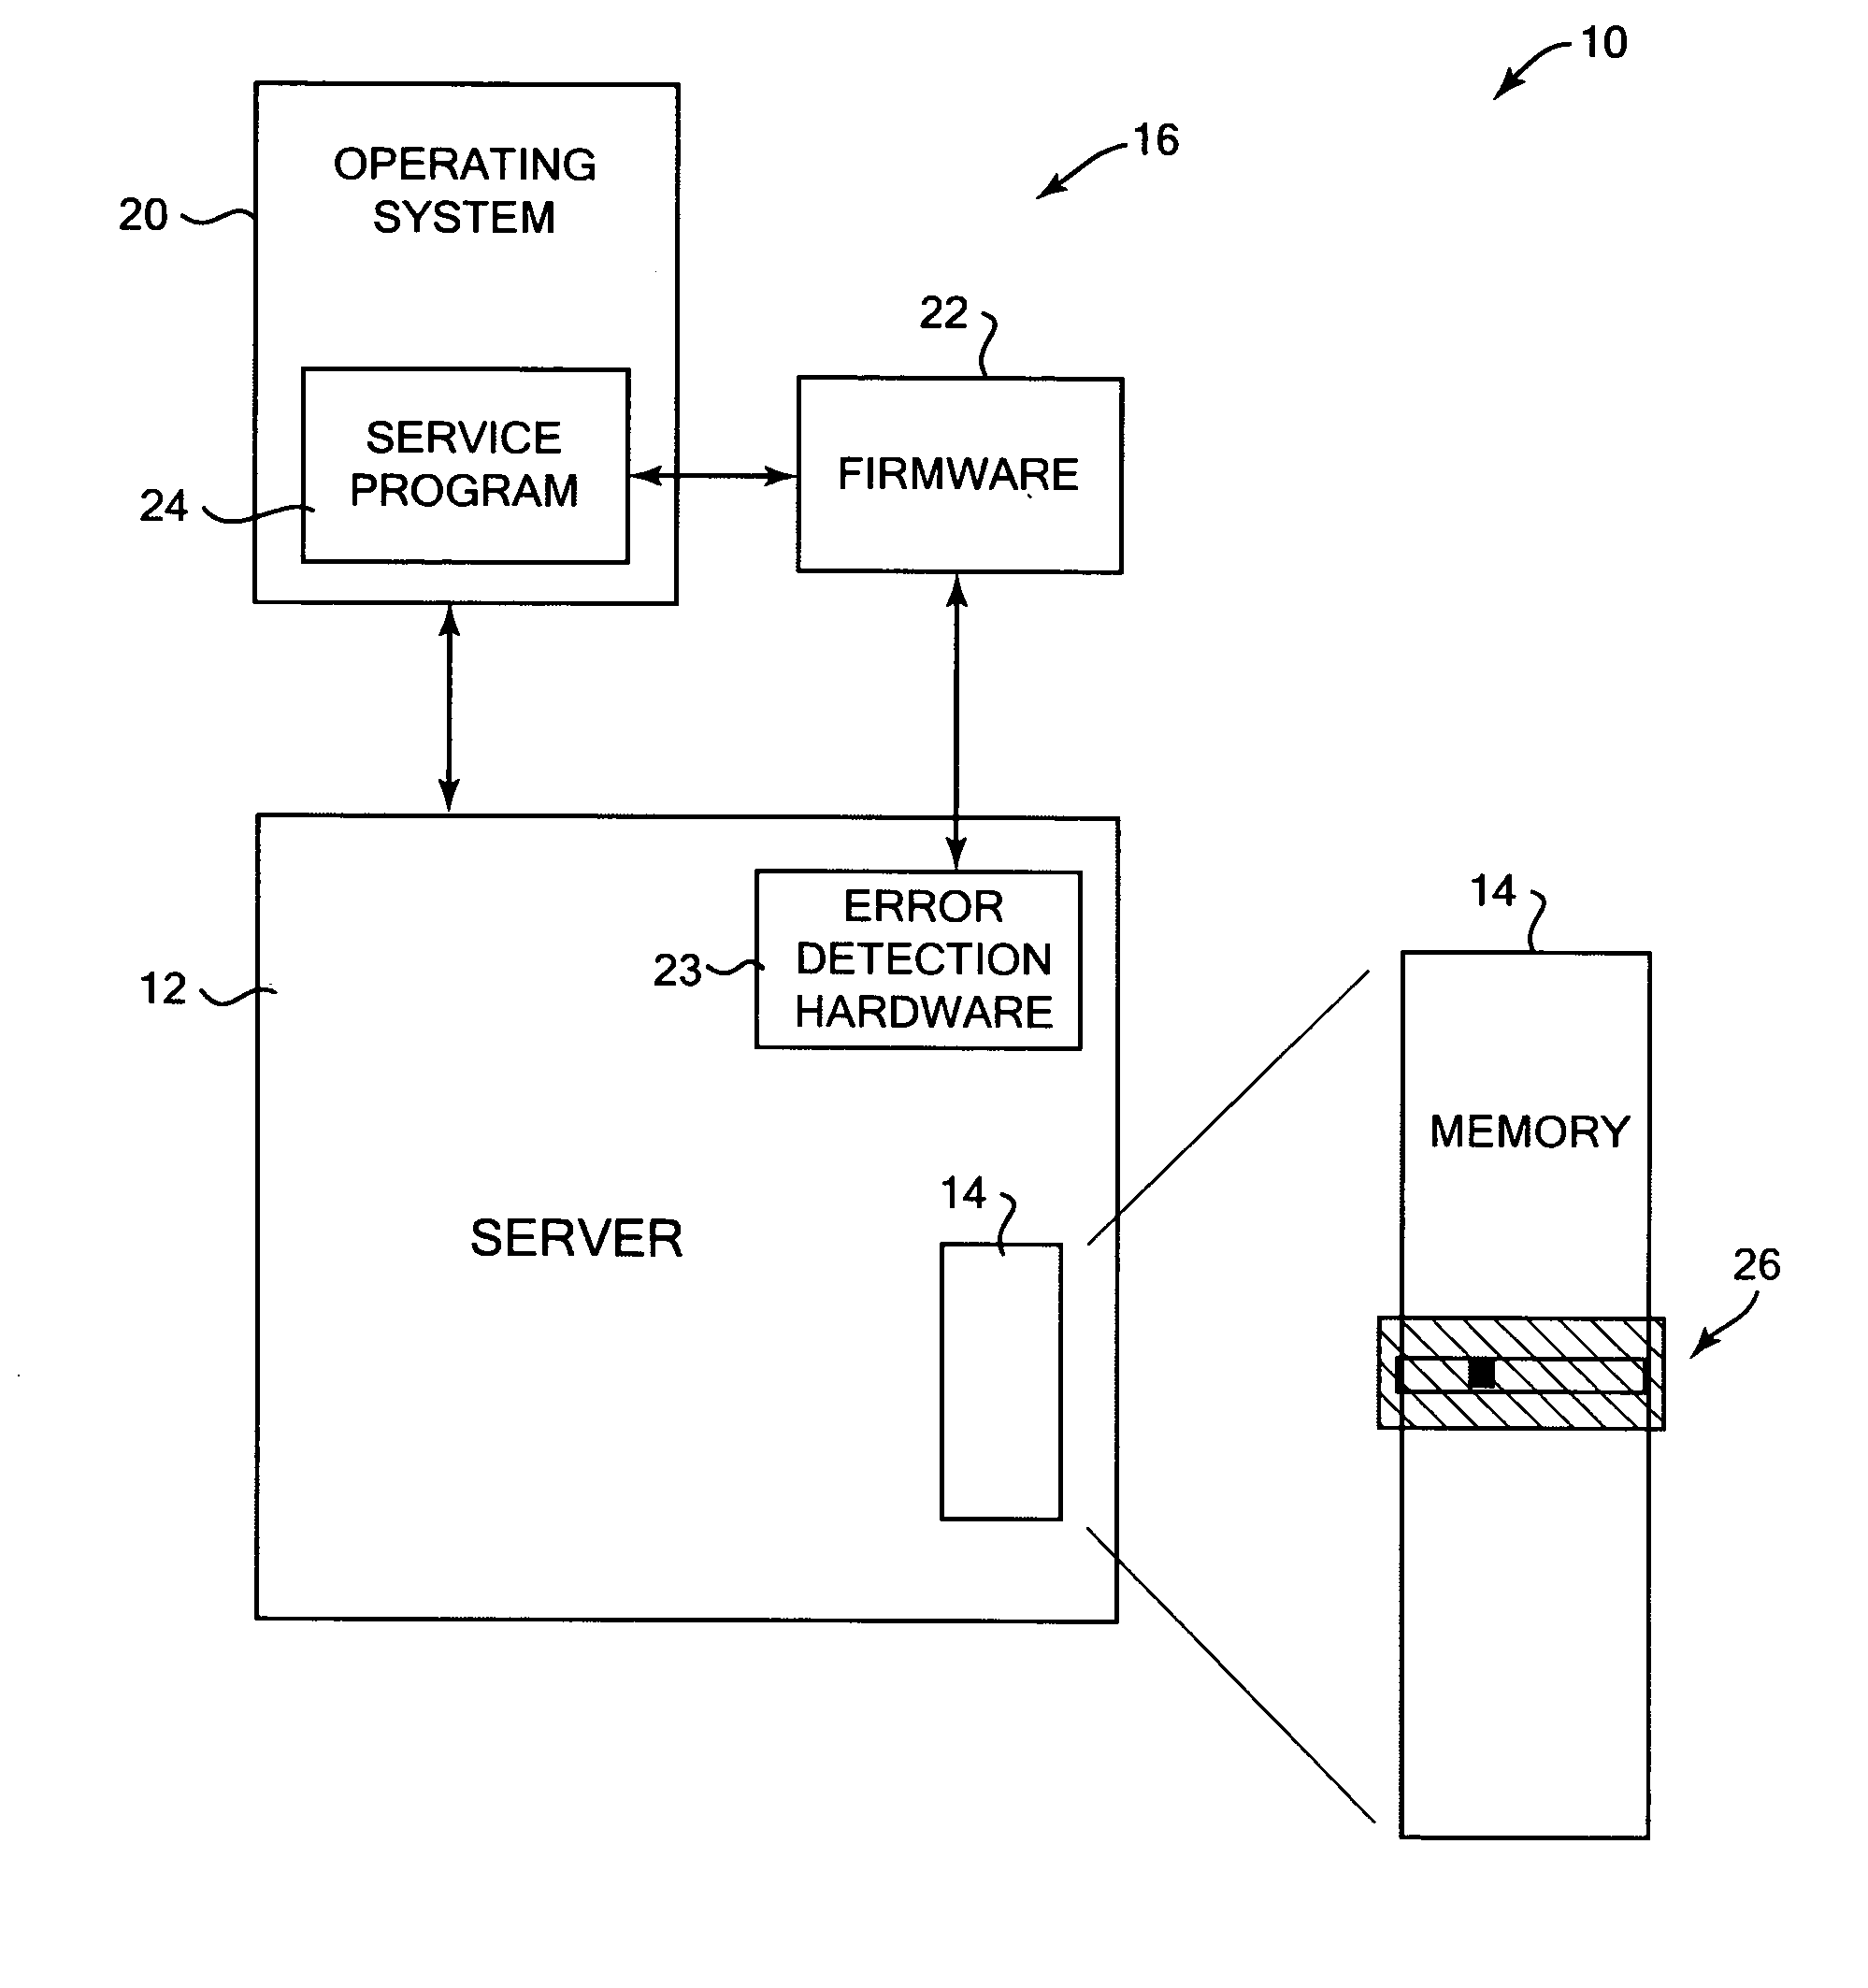 Method and system for reducing memory faults while running an operating system